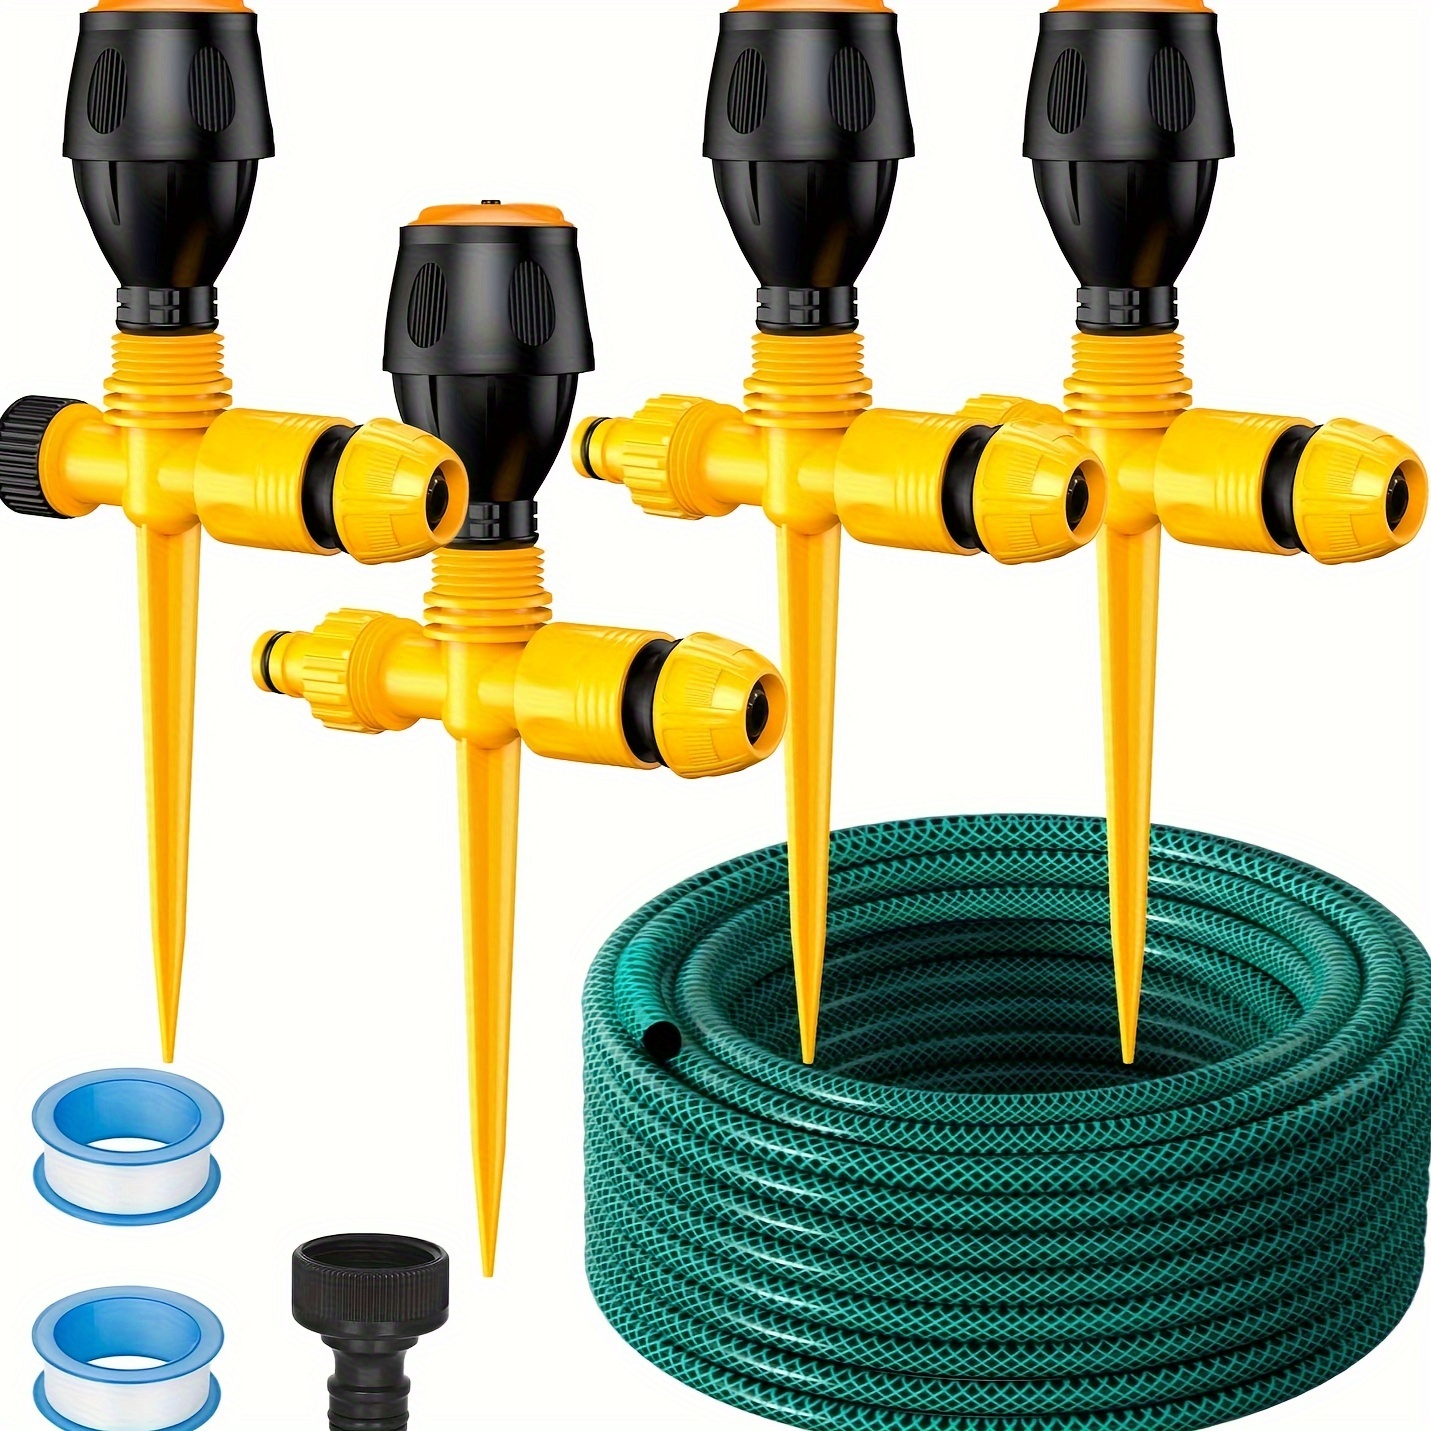 

Garden Above Ground Sprinkler System Kit For Lawn, Two-way Sprinkler 360° Auto Swivel Garden Watering System, For Yard Watering Kit With 52.5 Ft Hose And 4 Ground Plugs